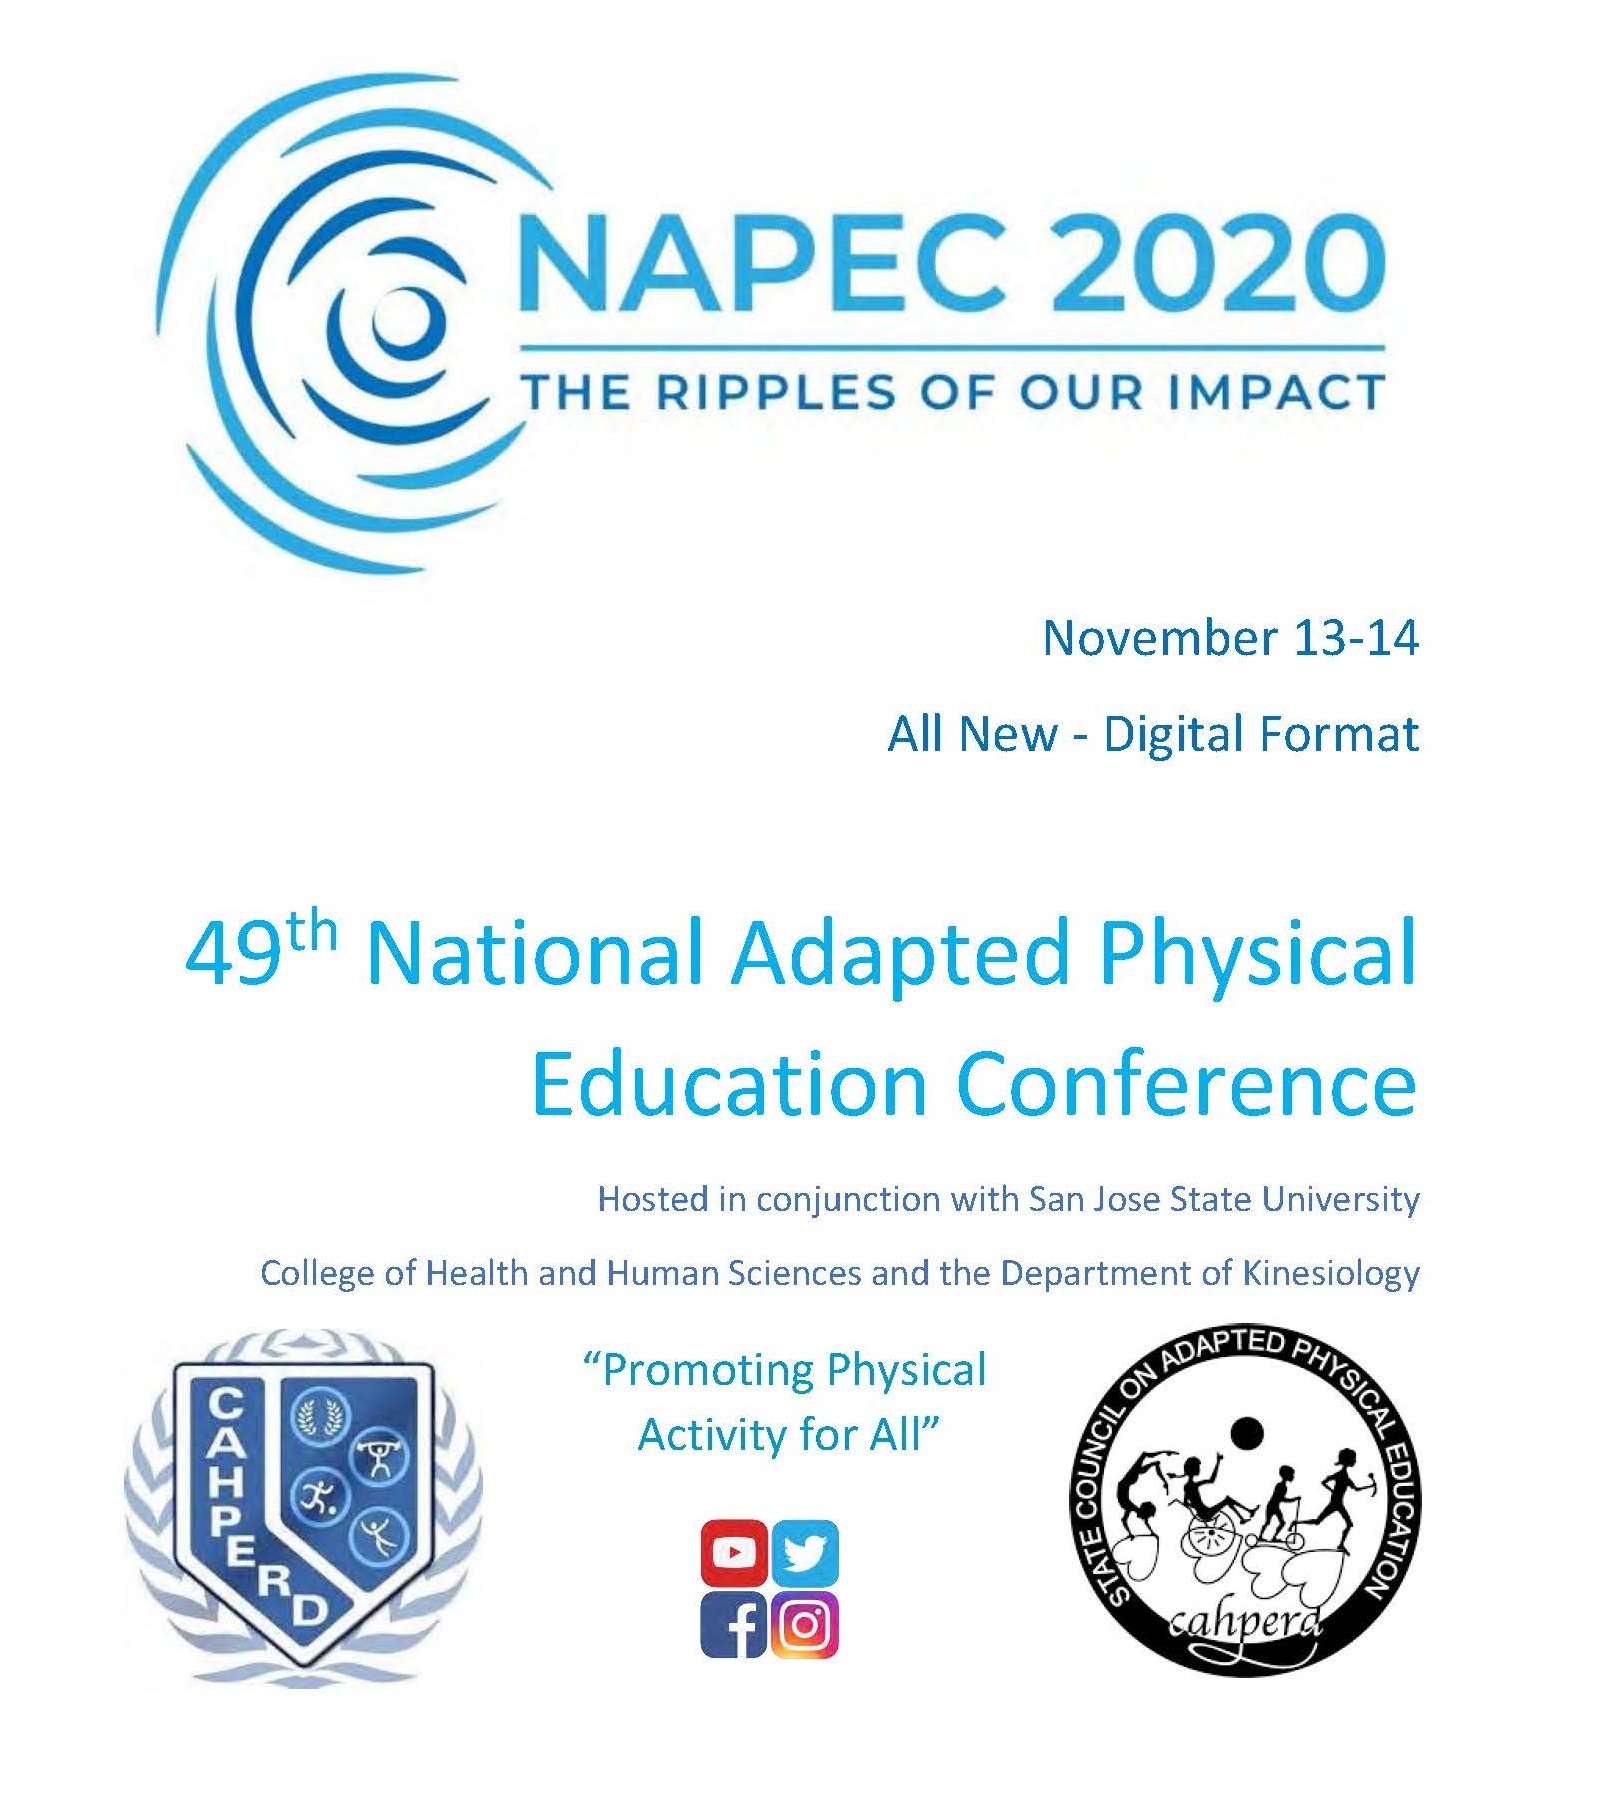 49th National Adapted Physical Education Conference